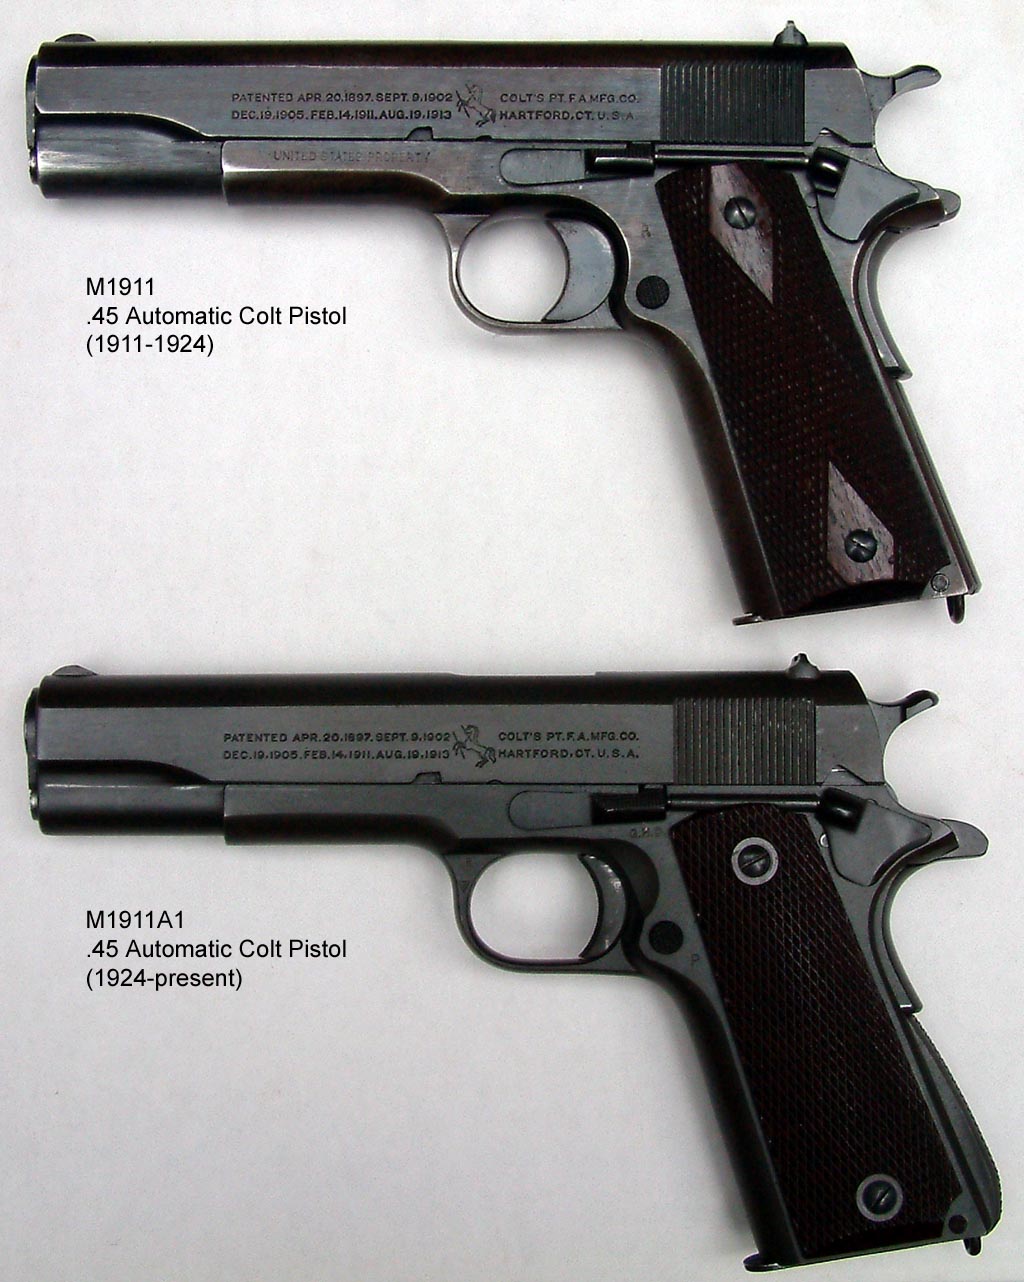 M1911_and_M1911A1_pistols.JPG